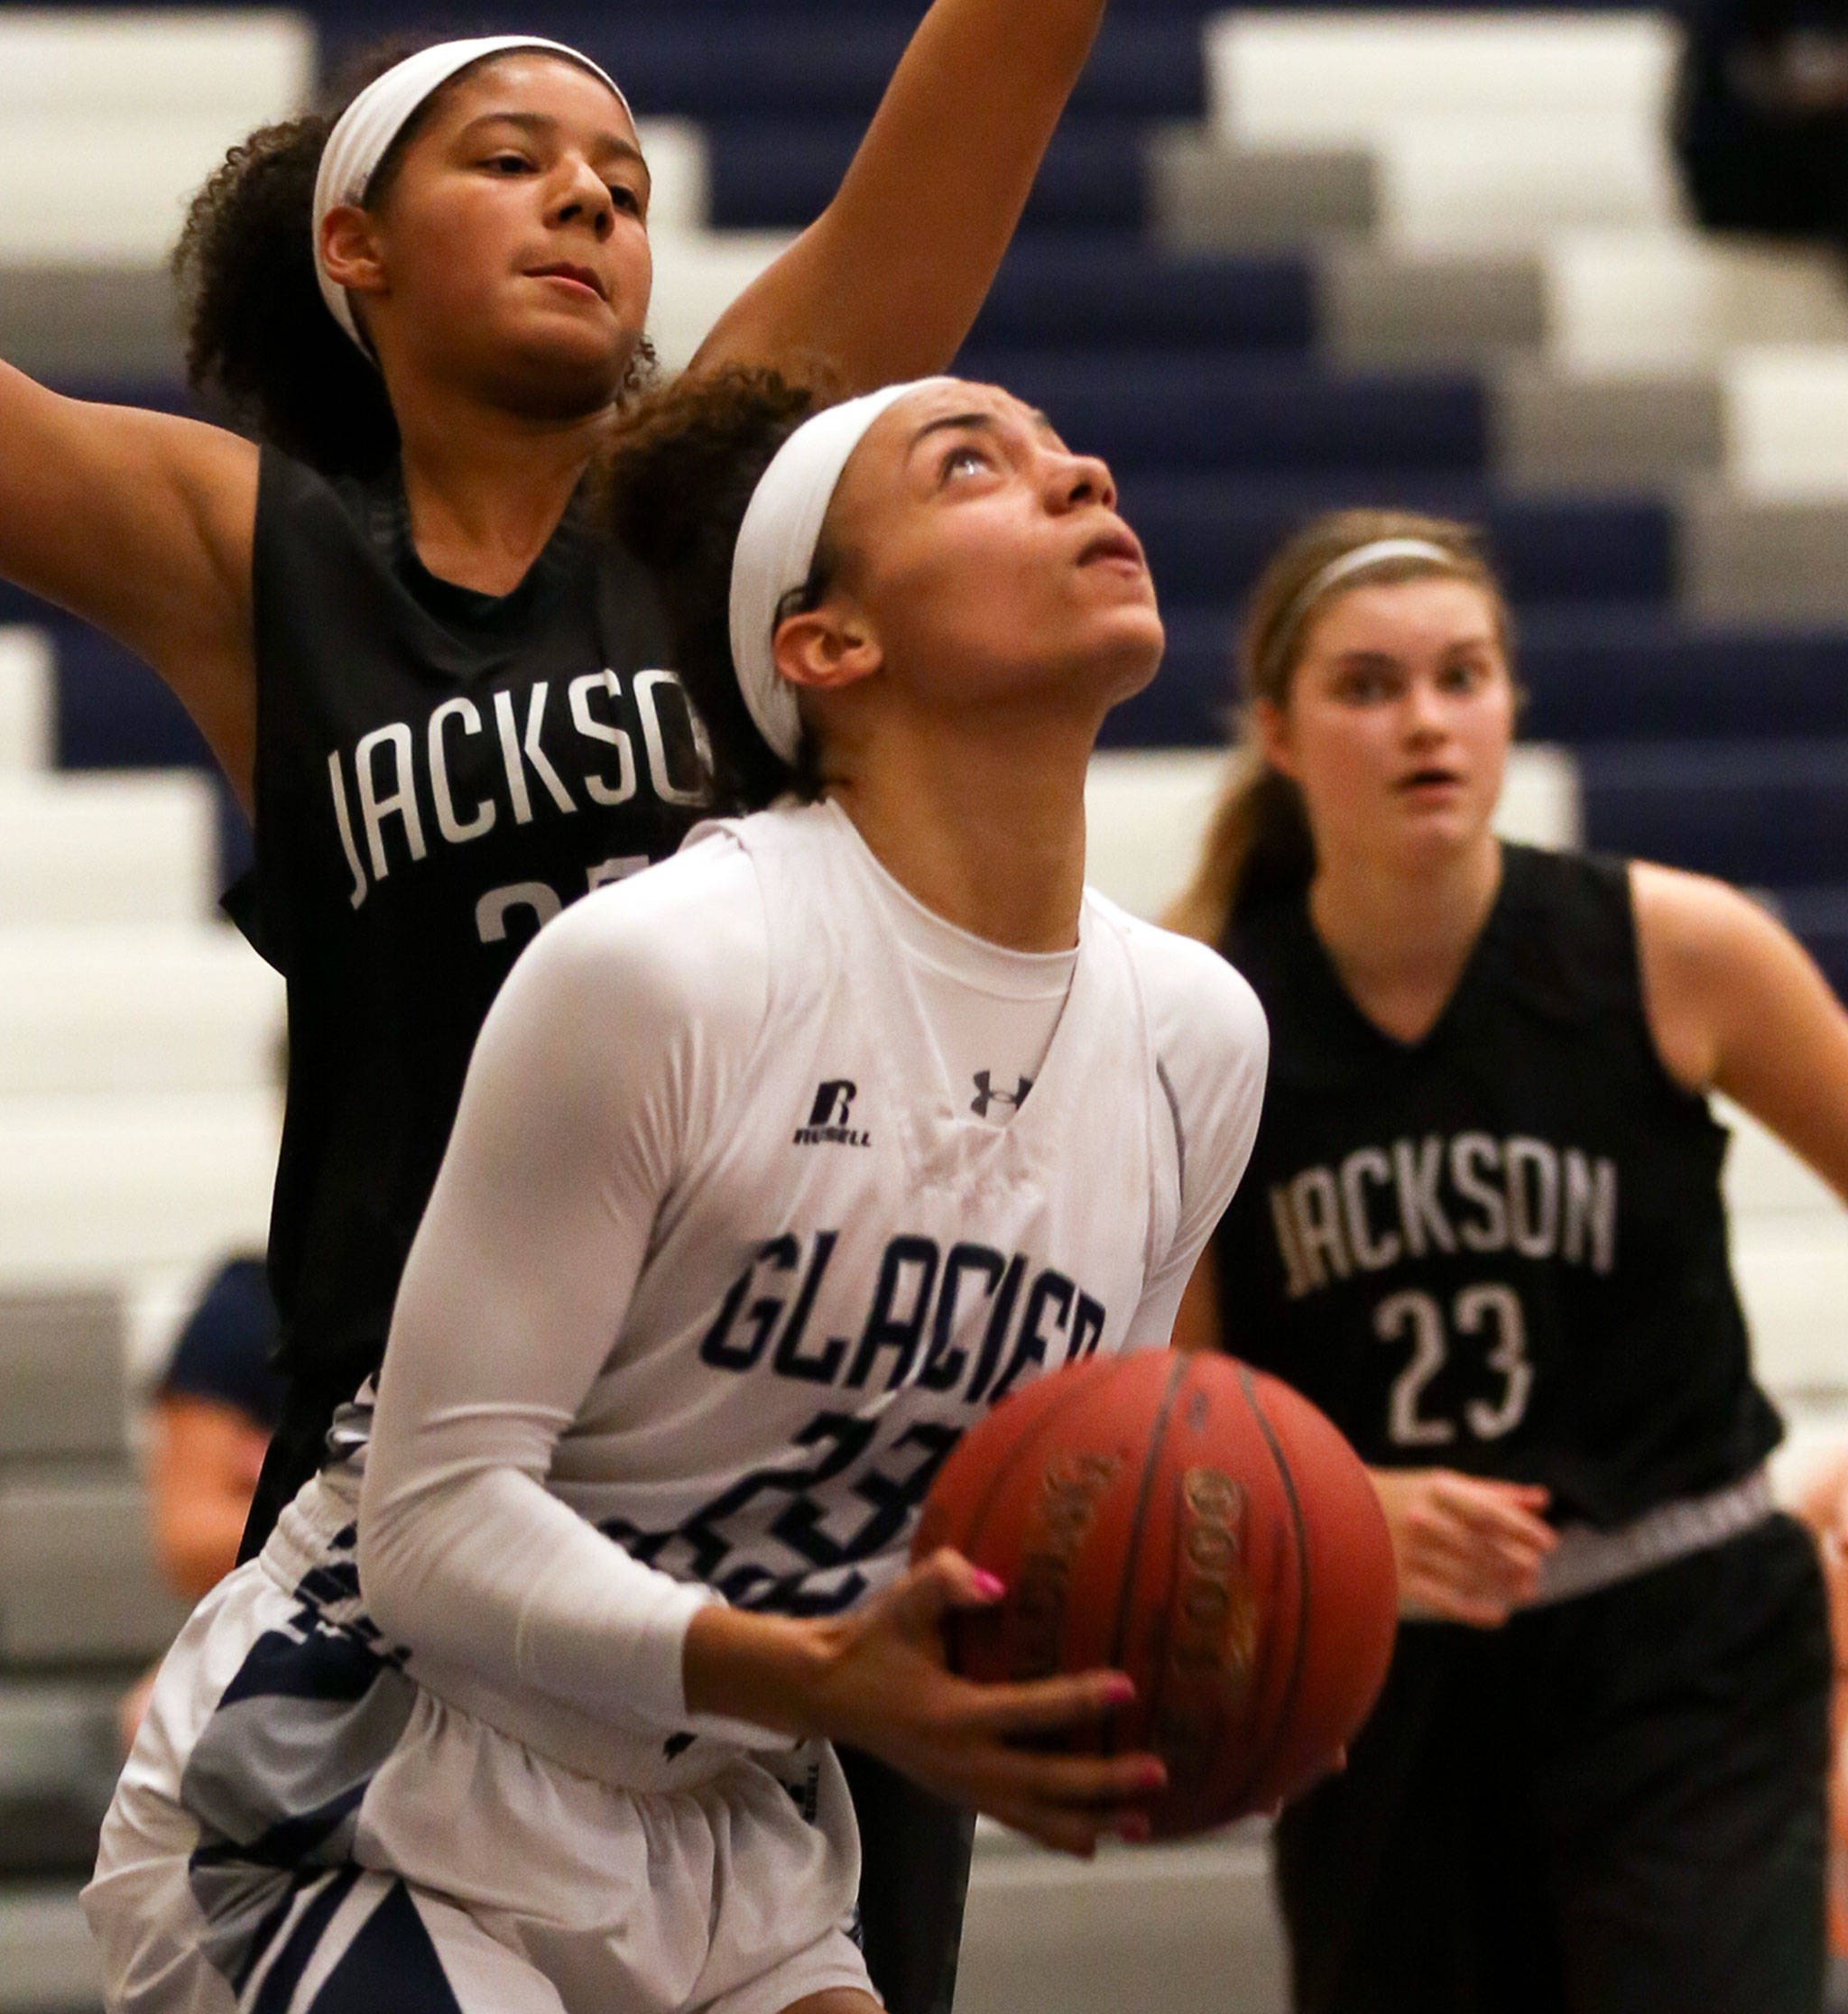 Glacier Peak’s Alexyss Newman looks for a shot with Jackson’s Olivia Skibiel defending during a game Dec. 15, 2017, at Glacier Peak High School in Snohomish. (Kevin Clark / The Daily Herald)